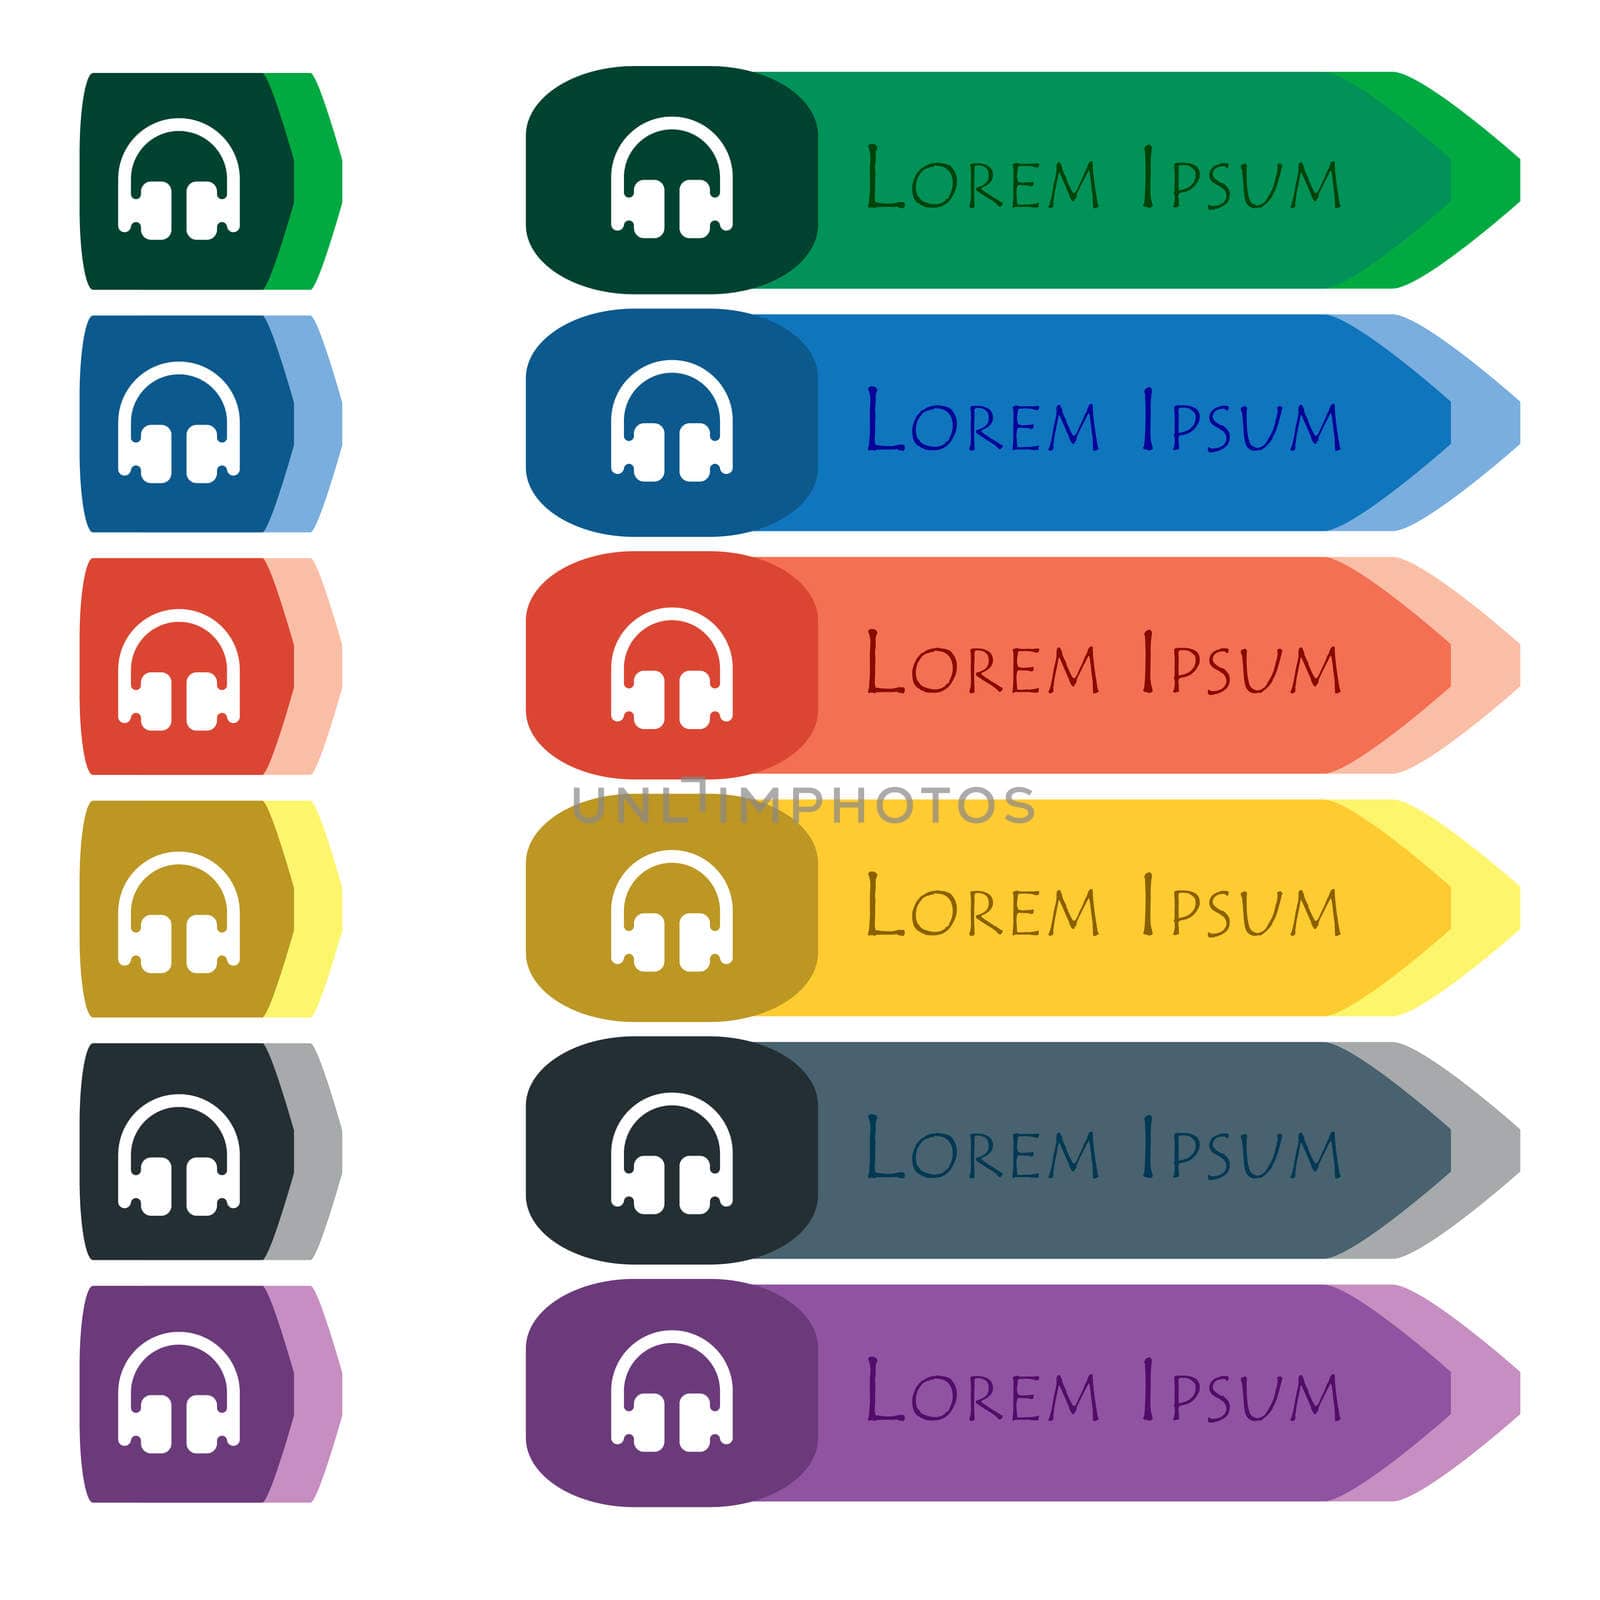 Headphones, Earphones icon sign. Set of colorful, bright long buttons with additional small modules. Flat design. 